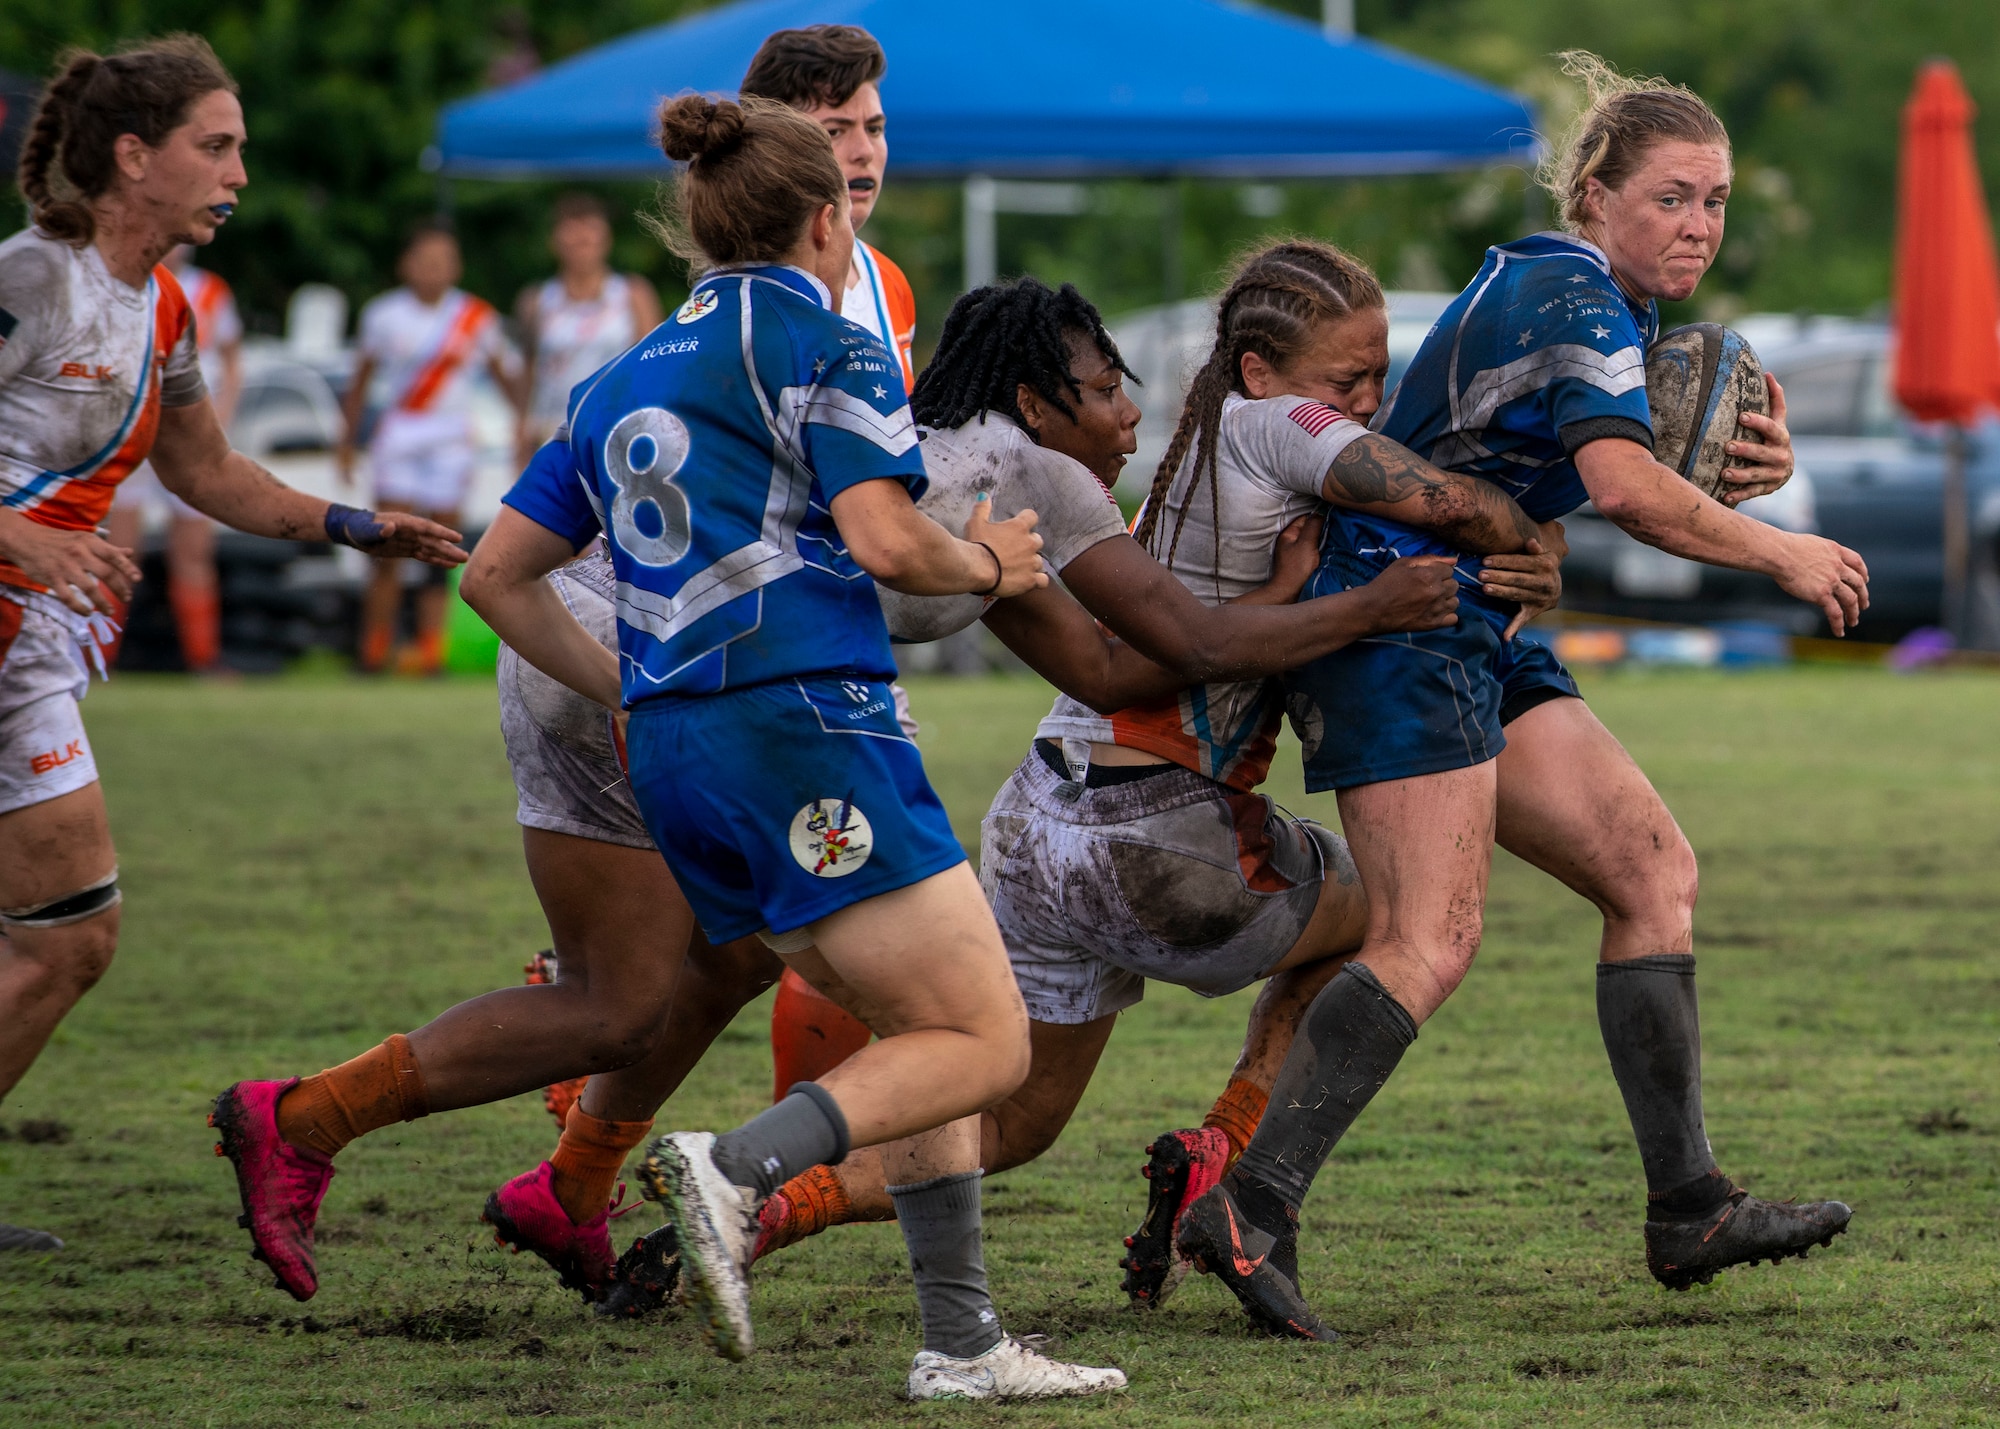 Second Lt. Adrienne Yoder, right, United States Air Force rugby player, runs with the ball during a rugby match against the United States Coast Guard at the Annual Armed Forces Women’s Rugby Championship in Wilmington, North Carolina, June 26, 2021.